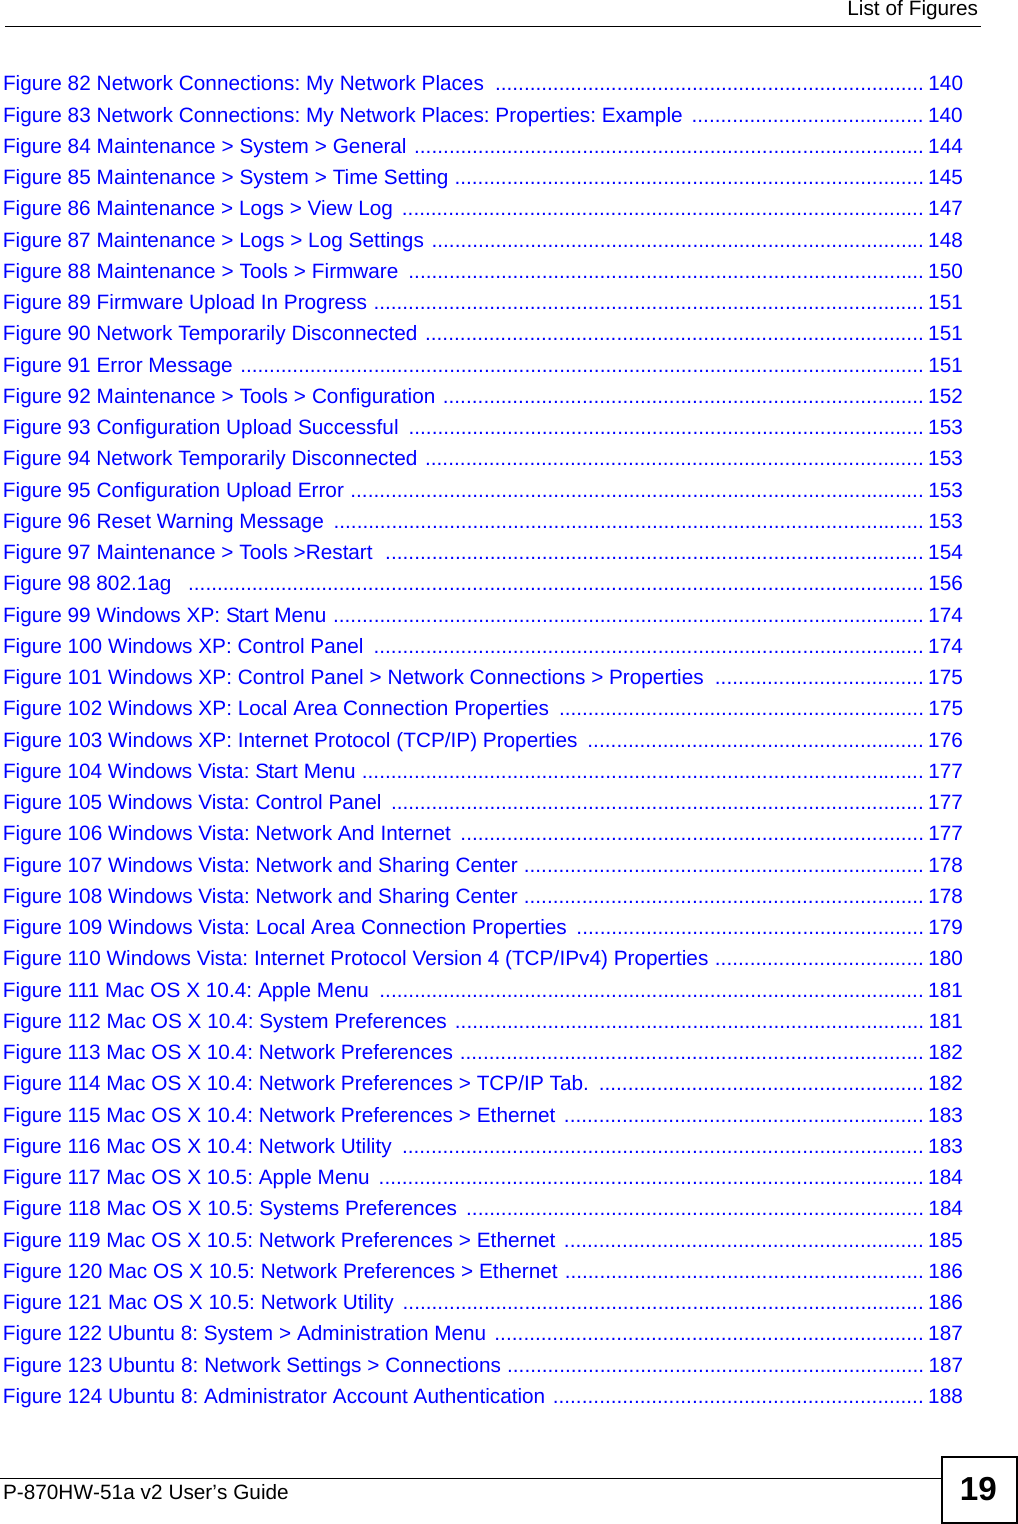  List of FiguresP-870HW-51a v2 User’s Guide 19Figure 82 Network Connections: My Network Places  .......................................................................... 140Figure 83 Network Connections: My Network Places: Properties: Example  ........................................ 140Figure 84 Maintenance &gt; System &gt; General ........................................................................................ 144Figure 85 Maintenance &gt; System &gt; Time Setting ................................................................................. 145Figure 86 Maintenance &gt; Logs &gt; View Log  .......................................................................................... 147Figure 87 Maintenance &gt; Logs &gt; Log Settings ..................................................................................... 148Figure 88 Maintenance &gt; Tools &gt; Firmware ......................................................................................... 150Figure 89 Firmware Upload In Progress ............................................................................................... 151Figure 90 Network Temporarily Disconnected ...................................................................................... 151Figure 91 Error Message ...................................................................................................................... 151Figure 92 Maintenance &gt; Tools &gt; Configuration ................................................................................... 152Figure 93 Configuration Upload Successful ......................................................................................... 153Figure 94 Network Temporarily Disconnected ...................................................................................... 153Figure 95 Configuration Upload Error ................................................................................................... 153Figure 96 Reset Warning Message ...................................................................................................... 153Figure 97 Maintenance &gt; Tools &gt;Restart  ............................................................................................. 154Figure 98 802.1ag   ............................................................................................................................... 156Figure 99 Windows XP: Start Menu ...................................................................................................... 174Figure 100 Windows XP: Control Panel  ............................................................................................... 174Figure 101 Windows XP: Control Panel &gt; Network Connections &gt; Properties  .................................... 175Figure 102 Windows XP: Local Area Connection Properties ............................................................... 175Figure 103 Windows XP: Internet Protocol (TCP/IP) Properties  .......................................................... 176Figure 104 Windows Vista: Start Menu ................................................................................................. 177Figure 105 Windows Vista: Control Panel  ............................................................................................ 177Figure 106 Windows Vista: Network And Internet  ................................................................................ 177Figure 107 Windows Vista: Network and Sharing Center ..................................................................... 178Figure 108 Windows Vista: Network and Sharing Center ..................................................................... 178Figure 109 Windows Vista: Local Area Connection Properties ............................................................ 179Figure 110 Windows Vista: Internet Protocol Version 4 (TCP/IPv4) Properties .................................... 180Figure 111 Mac OS X 10.4: Apple Menu .............................................................................................. 181Figure 112 Mac OS X 10.4: System Preferences ................................................................................. 181Figure 113 Mac OS X 10.4: Network Preferences ................................................................................ 182Figure 114 Mac OS X 10.4: Network Preferences &gt; TCP/IP Tab.  ........................................................ 182Figure 115 Mac OS X 10.4: Network Preferences &gt; Ethernet .............................................................. 183Figure 116 Mac OS X 10.4: Network Utility  .......................................................................................... 183Figure 117 Mac OS X 10.5: Apple Menu  .............................................................................................. 184Figure 118 Mac OS X 10.5: Systems Preferences  ............................................................................... 184Figure 119 Mac OS X 10.5: Network Preferences &gt; Ethernet .............................................................. 185Figure 120 Mac OS X 10.5: Network Preferences &gt; Ethernet .............................................................. 186Figure 121 Mac OS X 10.5: Network Utility .......................................................................................... 186Figure 122 Ubuntu 8: System &gt; Administration Menu .......................................................................... 187Figure 123 Ubuntu 8: Network Settings &gt; Connections ........................................................................ 187Figure 124 Ubuntu 8: Administrator Account Authentication ................................................................ 188